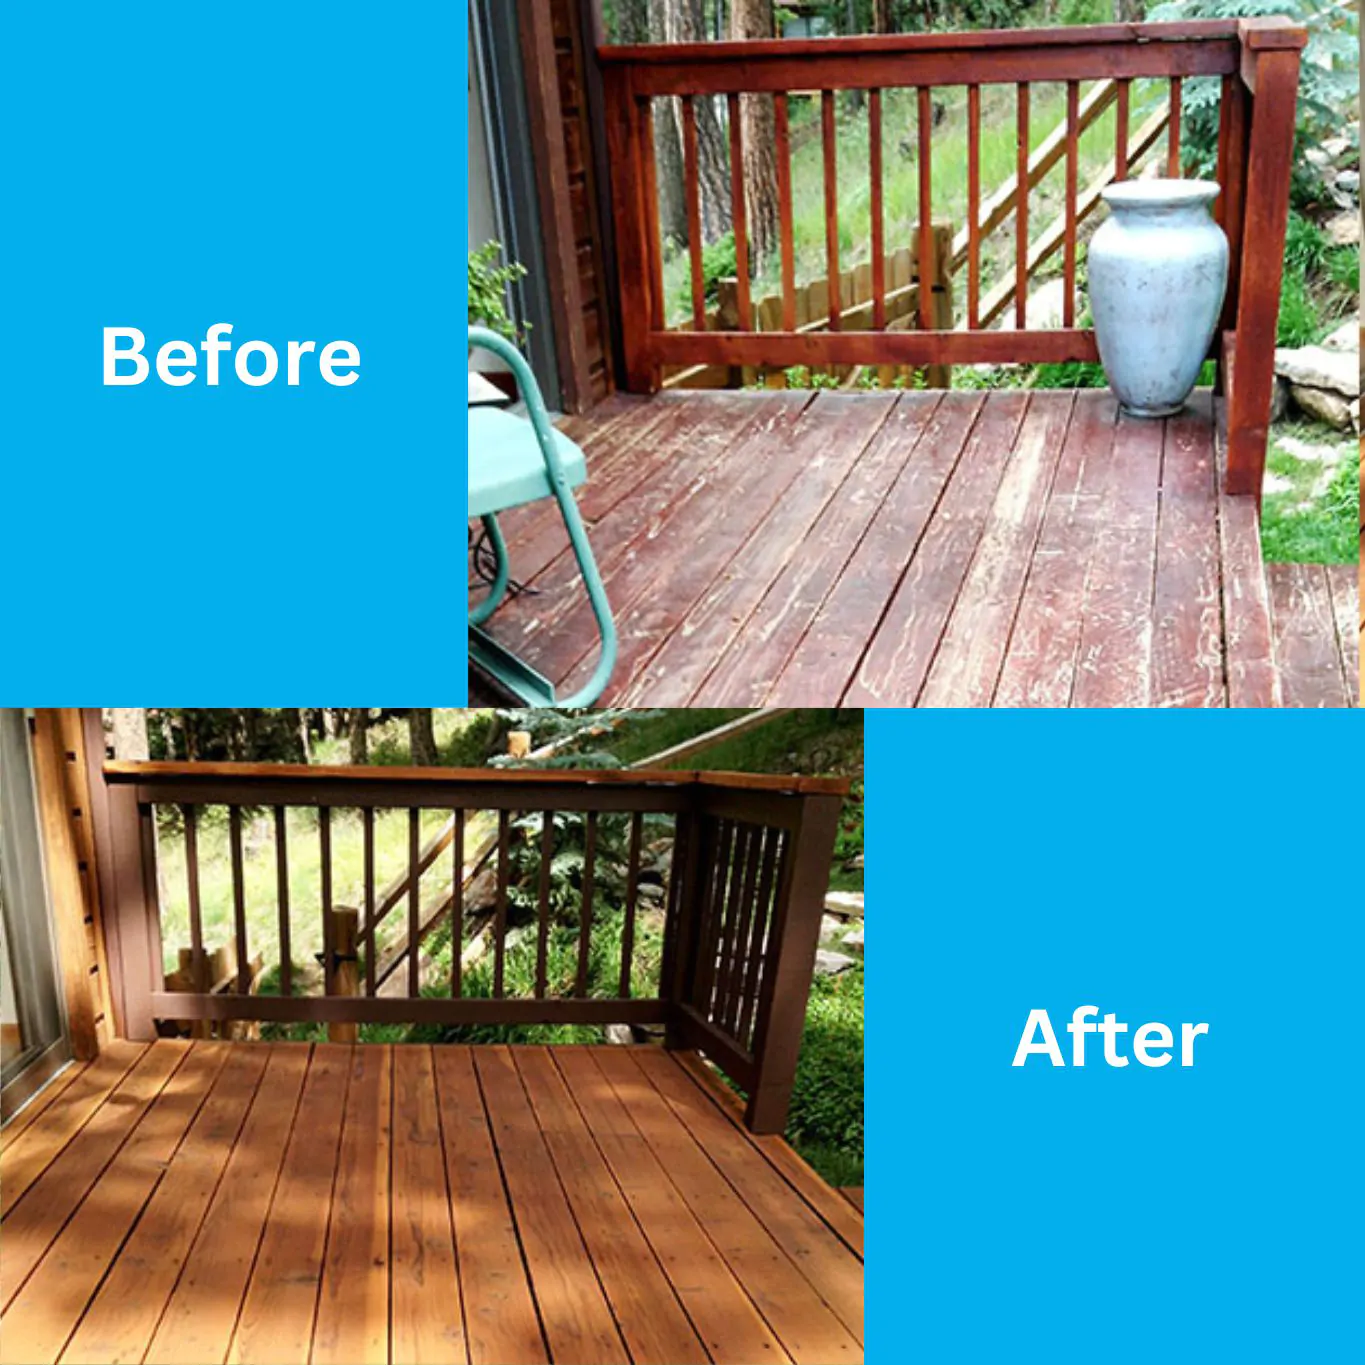 Before and After Deck Restoration Services - All Pro Cape May Deck Builders